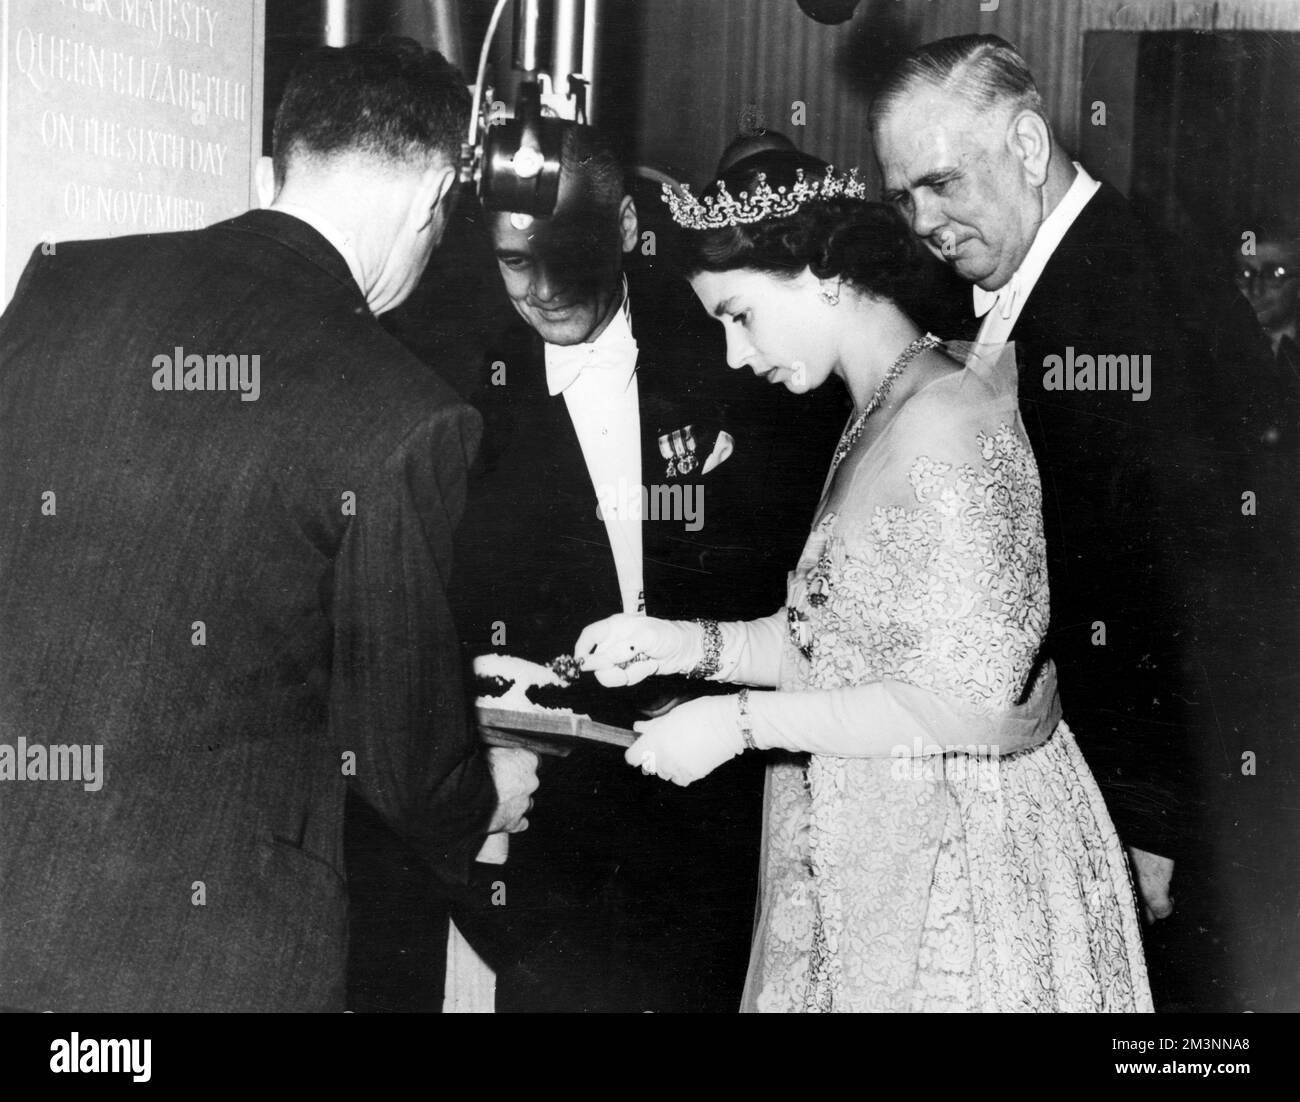 Queen Elizabeth II visits Lloyd's to lay the foundations tone of their new building in Lime Street. This picture shows her Majesty taking a trowel full of mortar ready to lay the stone.     Date: 6th November 1952. Stock Photo